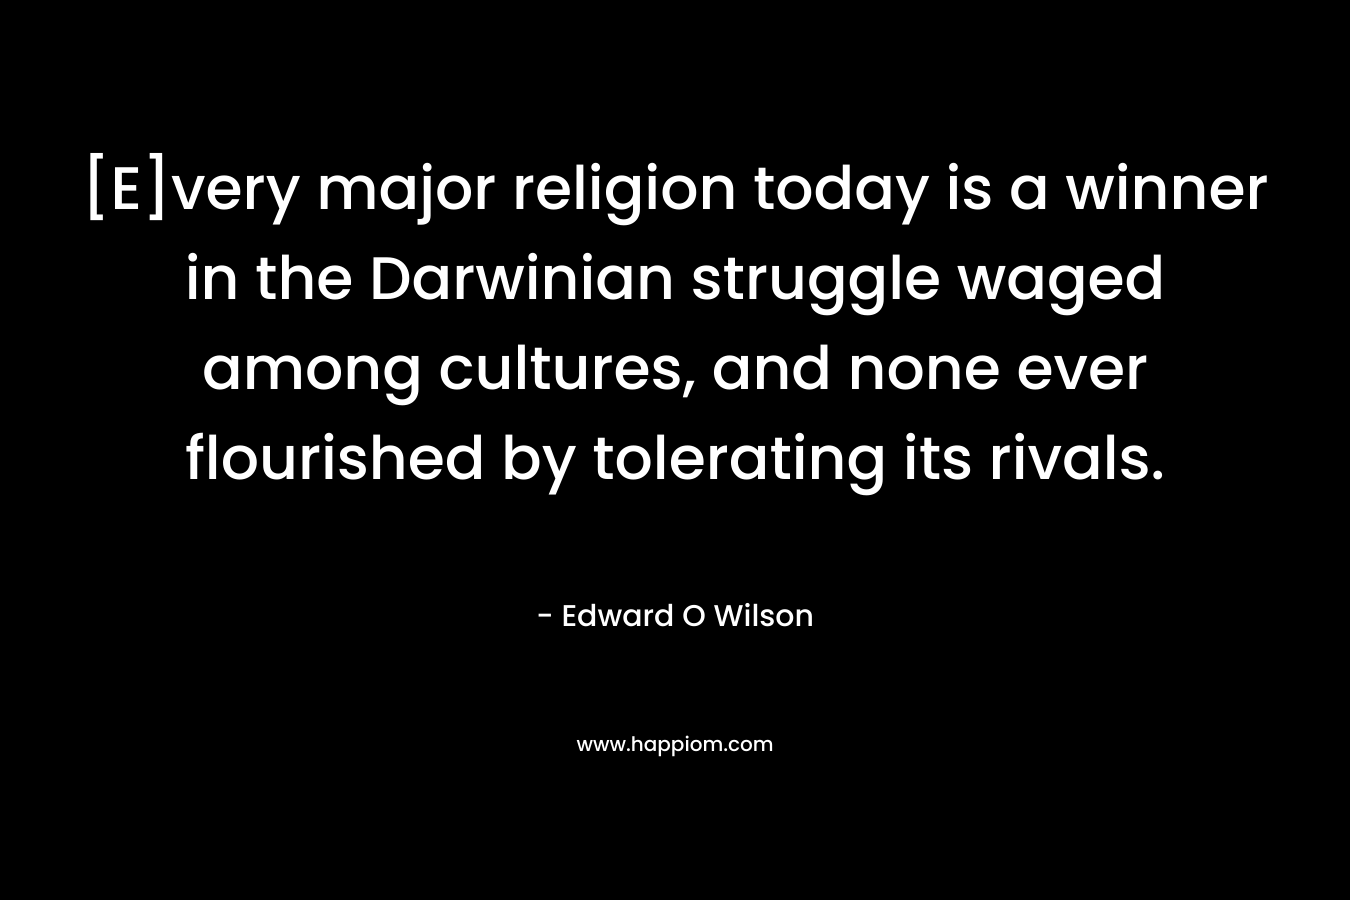 [E]very major religion today is a winner in the Darwinian struggle waged among cultures, and none ever flourished by tolerating its rivals. – Edward O Wilson